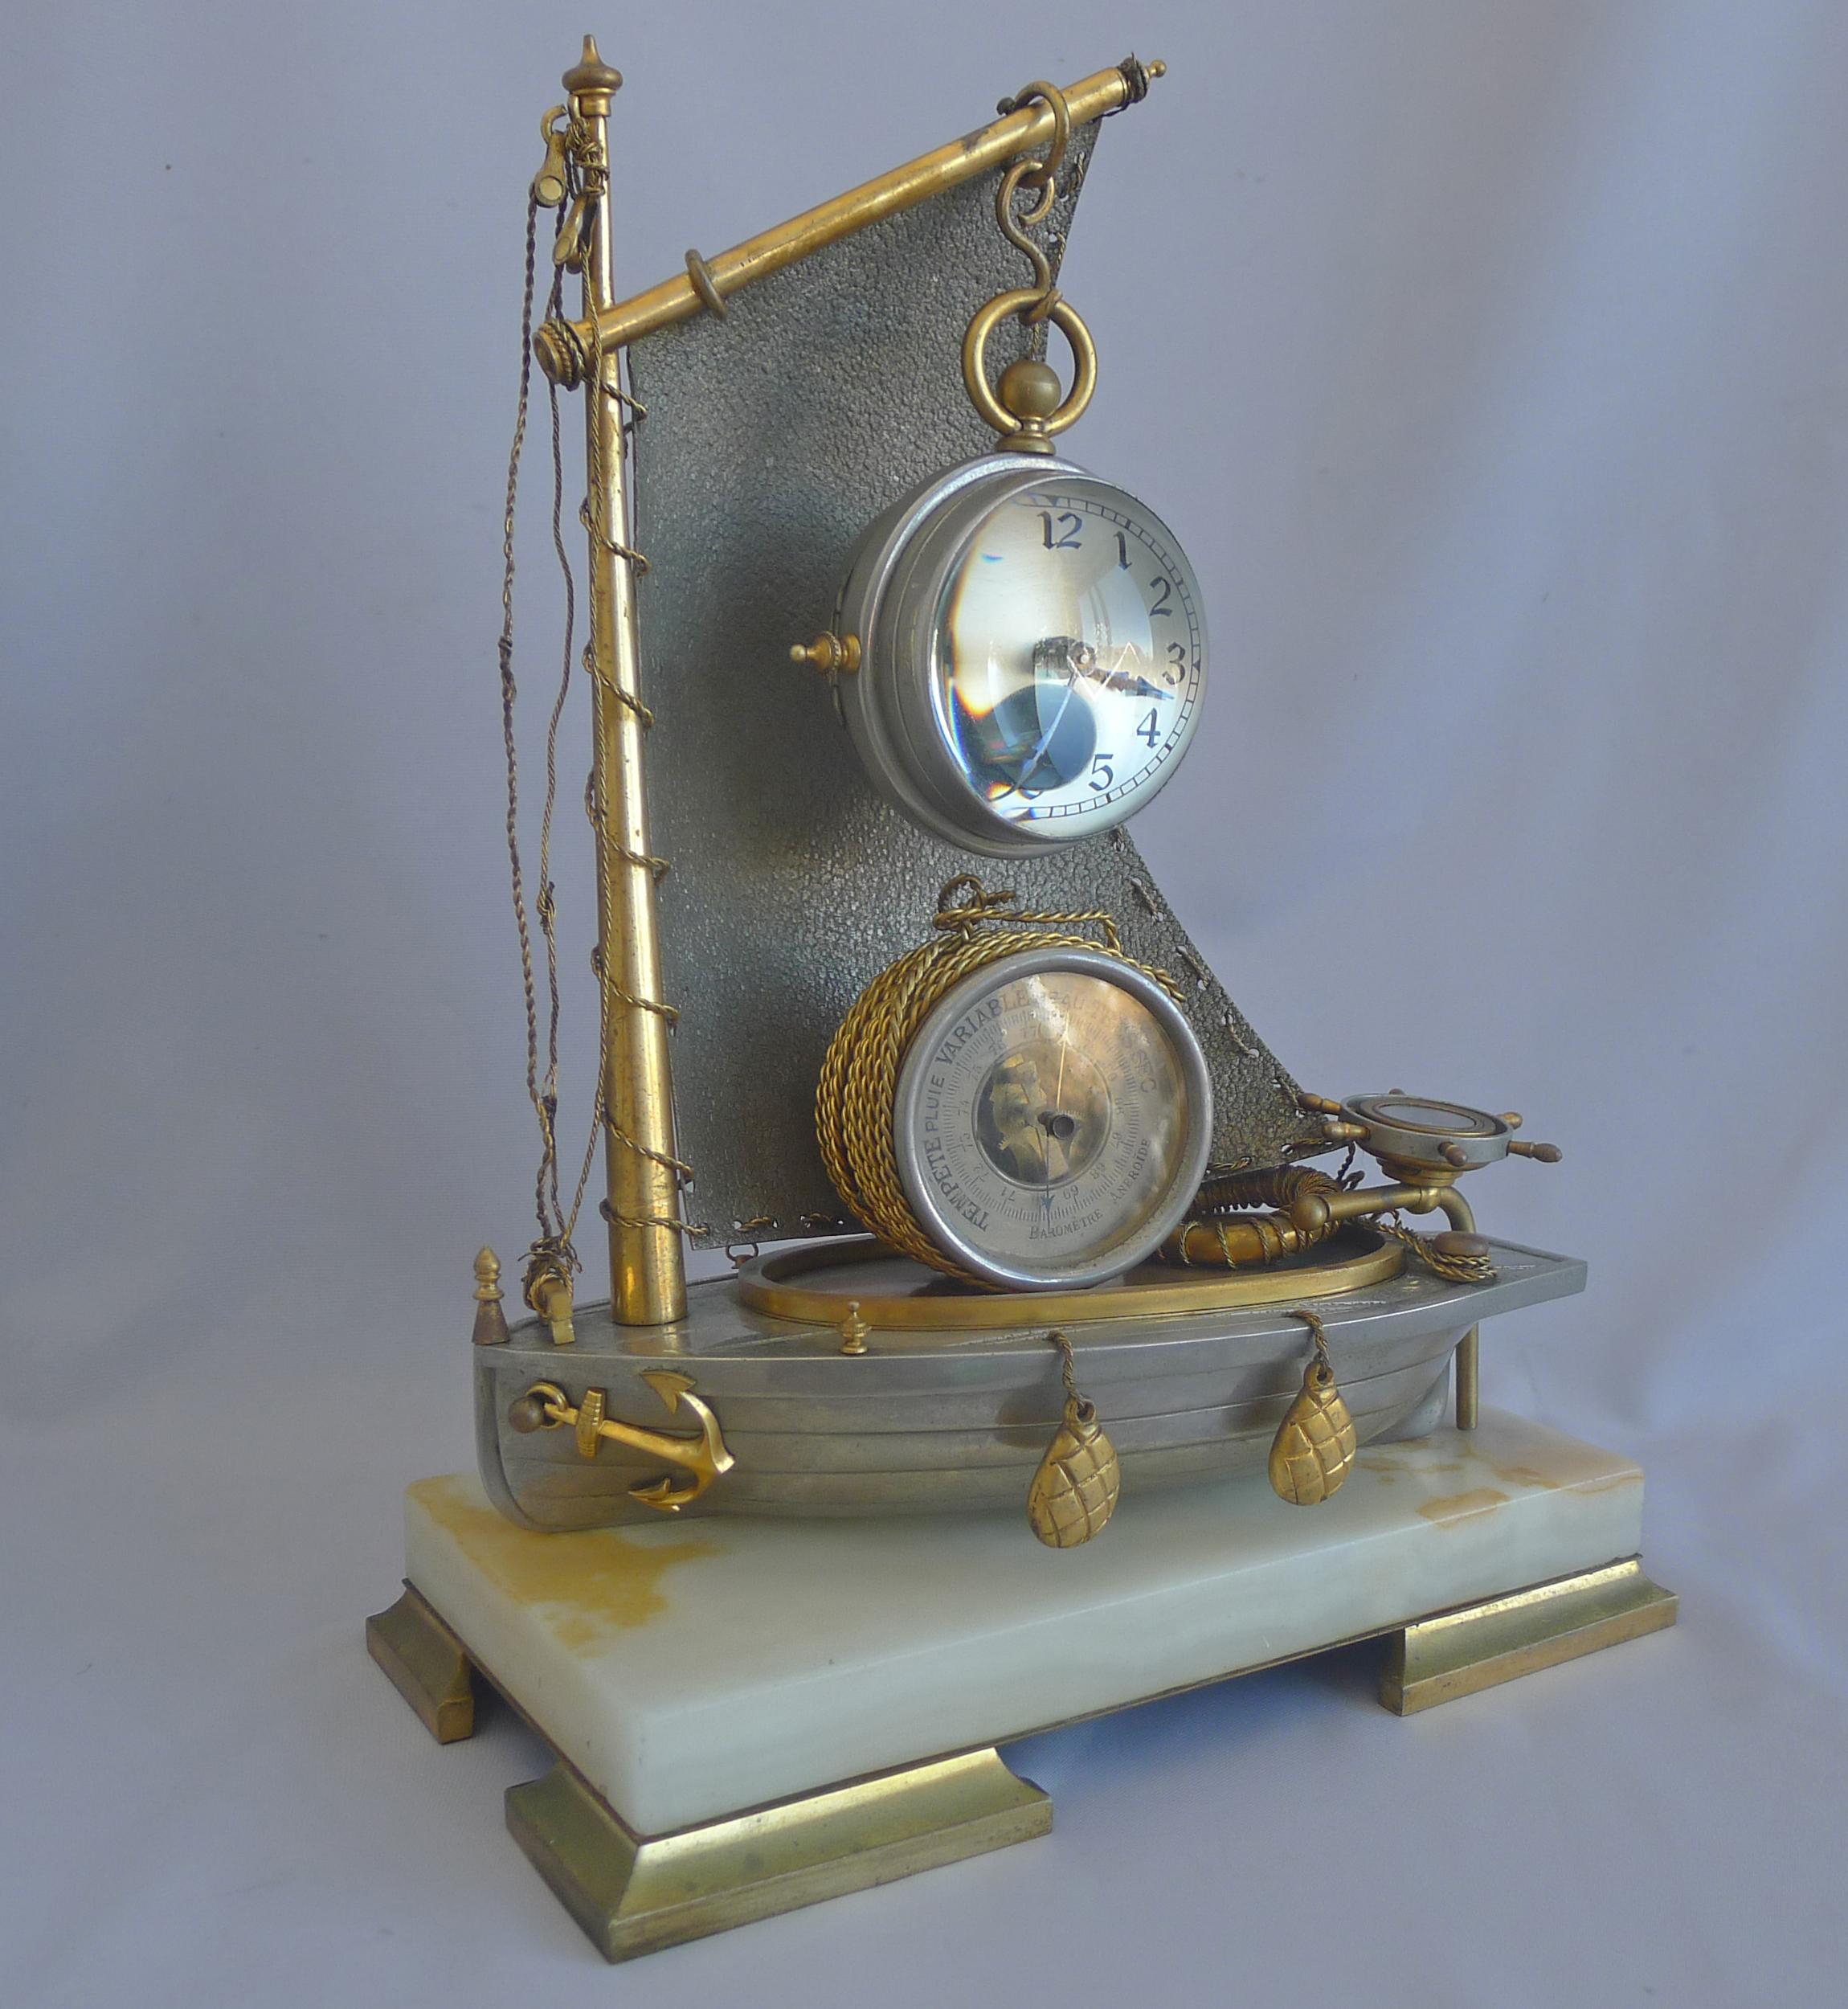 A very rare antique French Industrial series 'Sailboat' compendium clock. Set on four gilt bronze feet and a white onyx base. The silvered bronze hull of the boat with two gilt bronze bouys hanging on the side, as well as the anchor, also in gilt